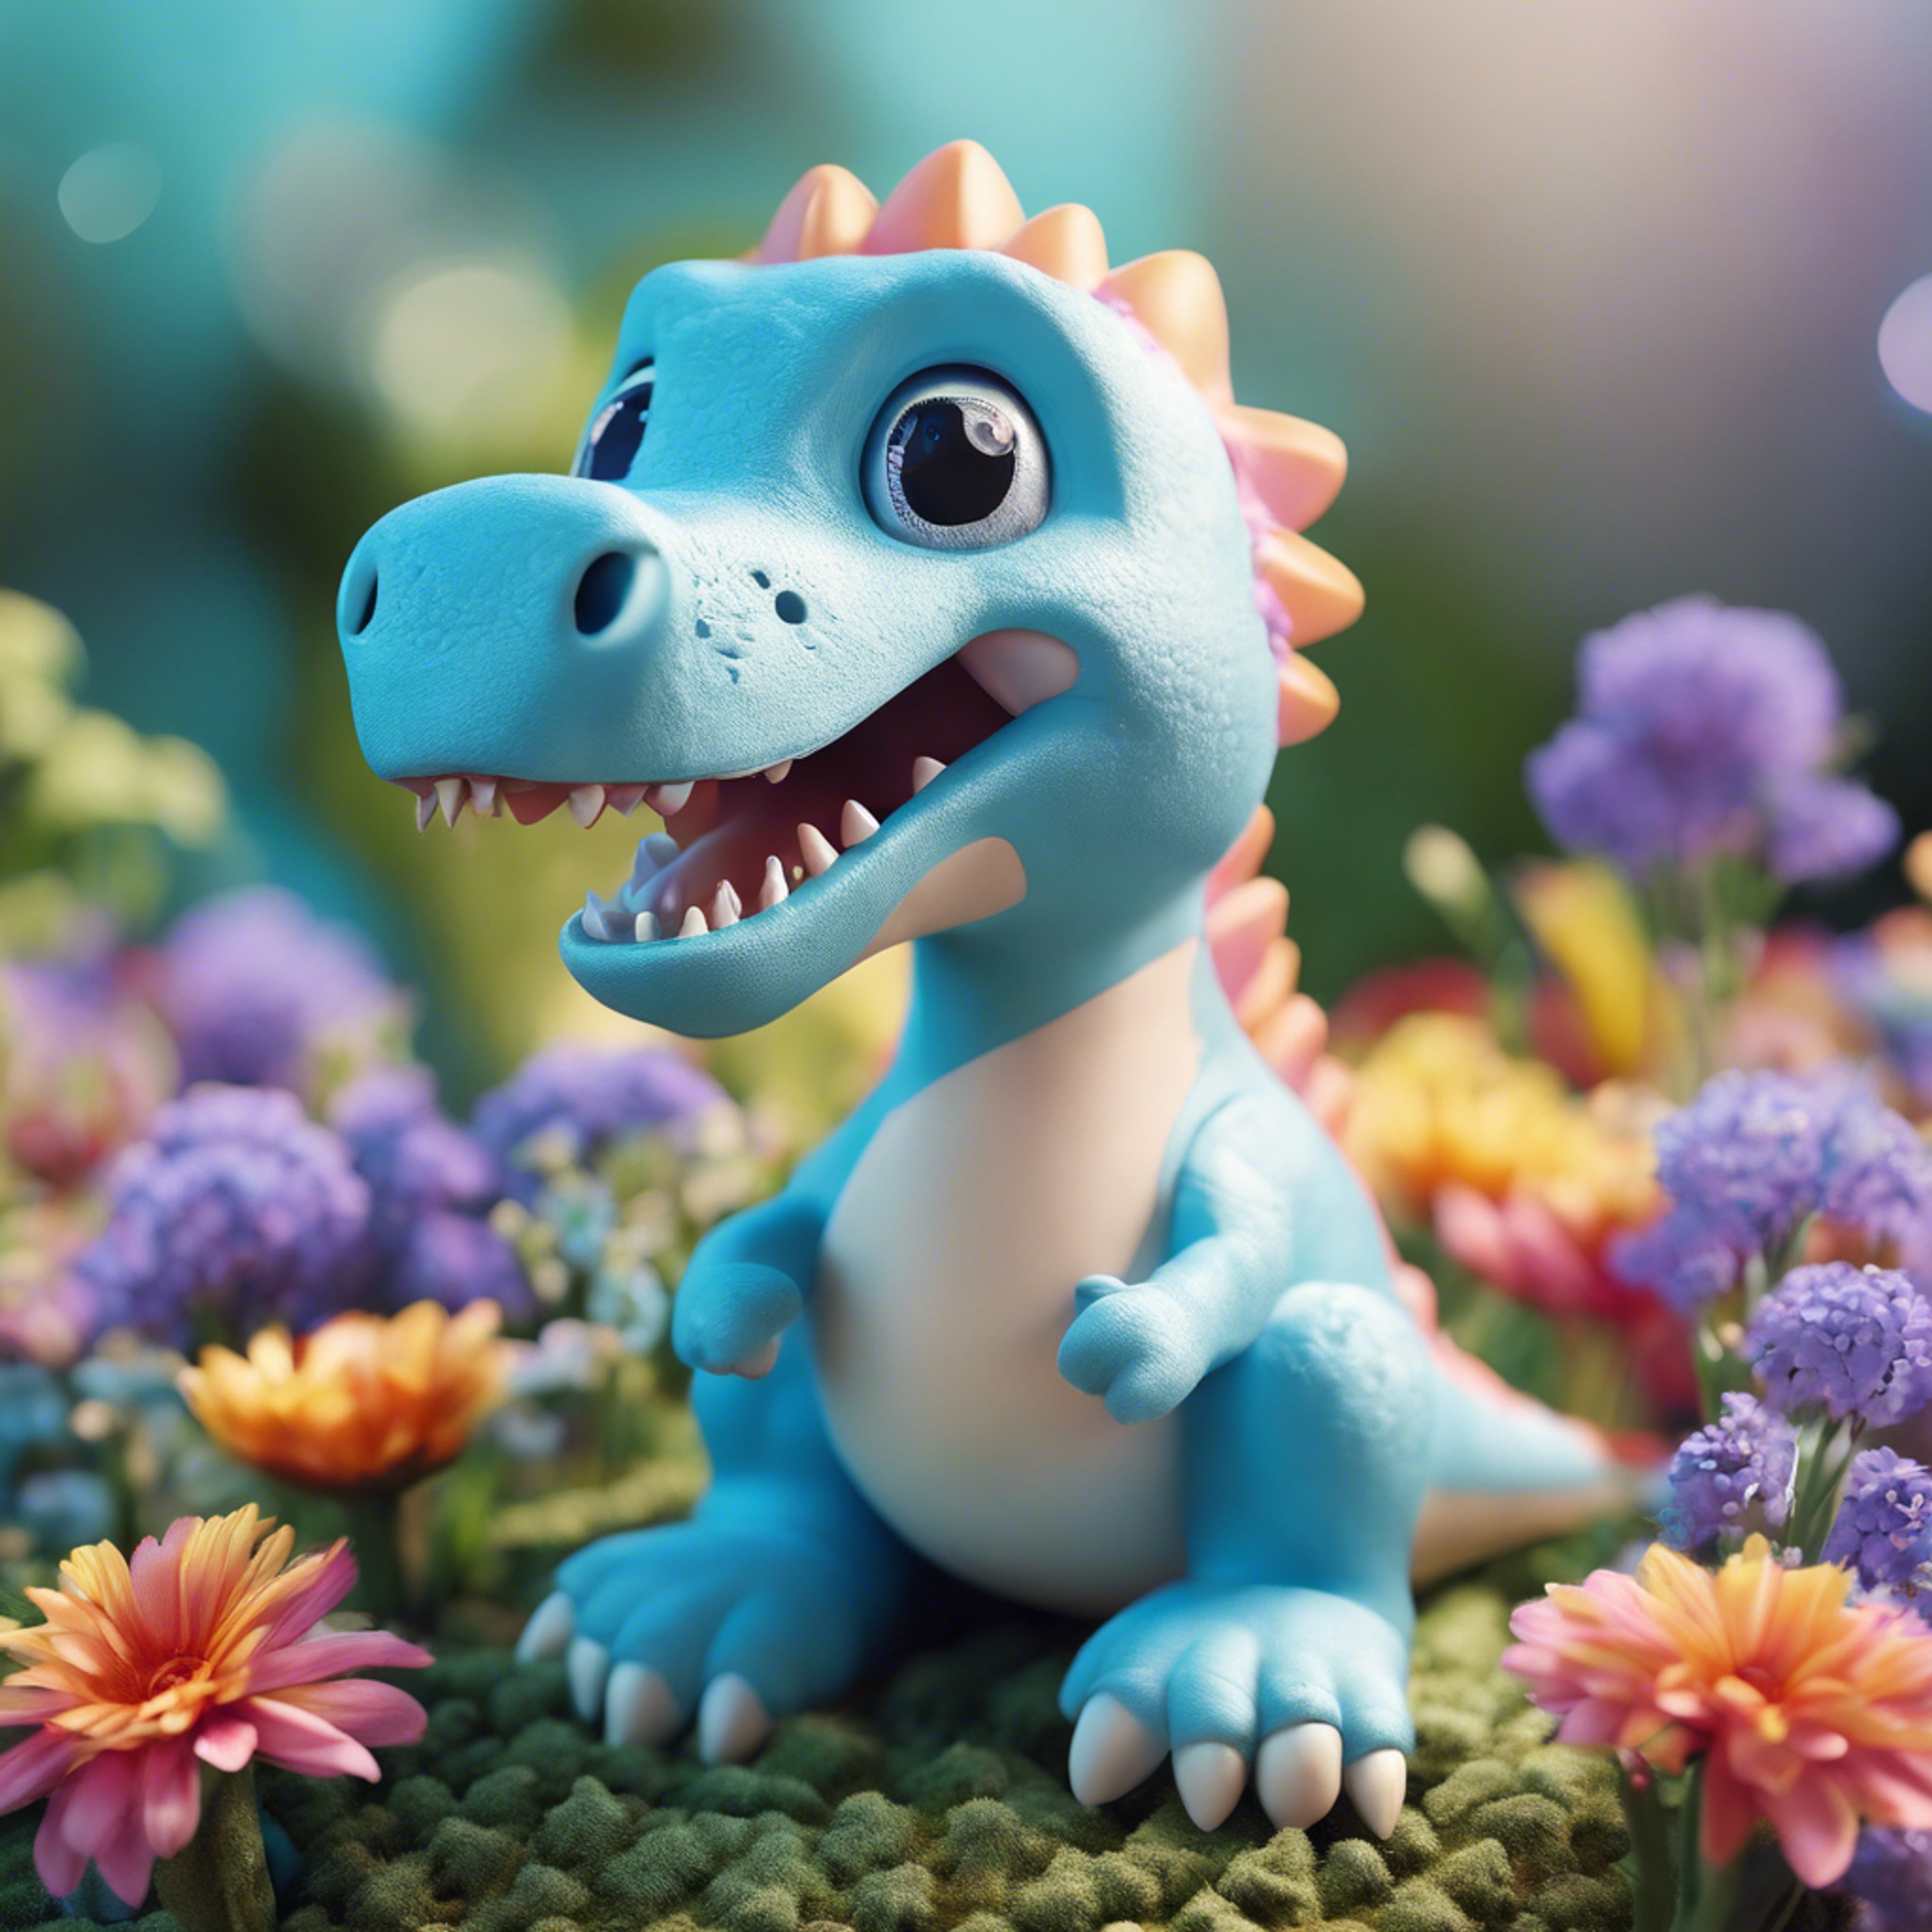 A cute light blue dinosaur with a kawaii expression, surrounded by brightly colored flowers. Tapeta[445e6142c59b4fa2886e]